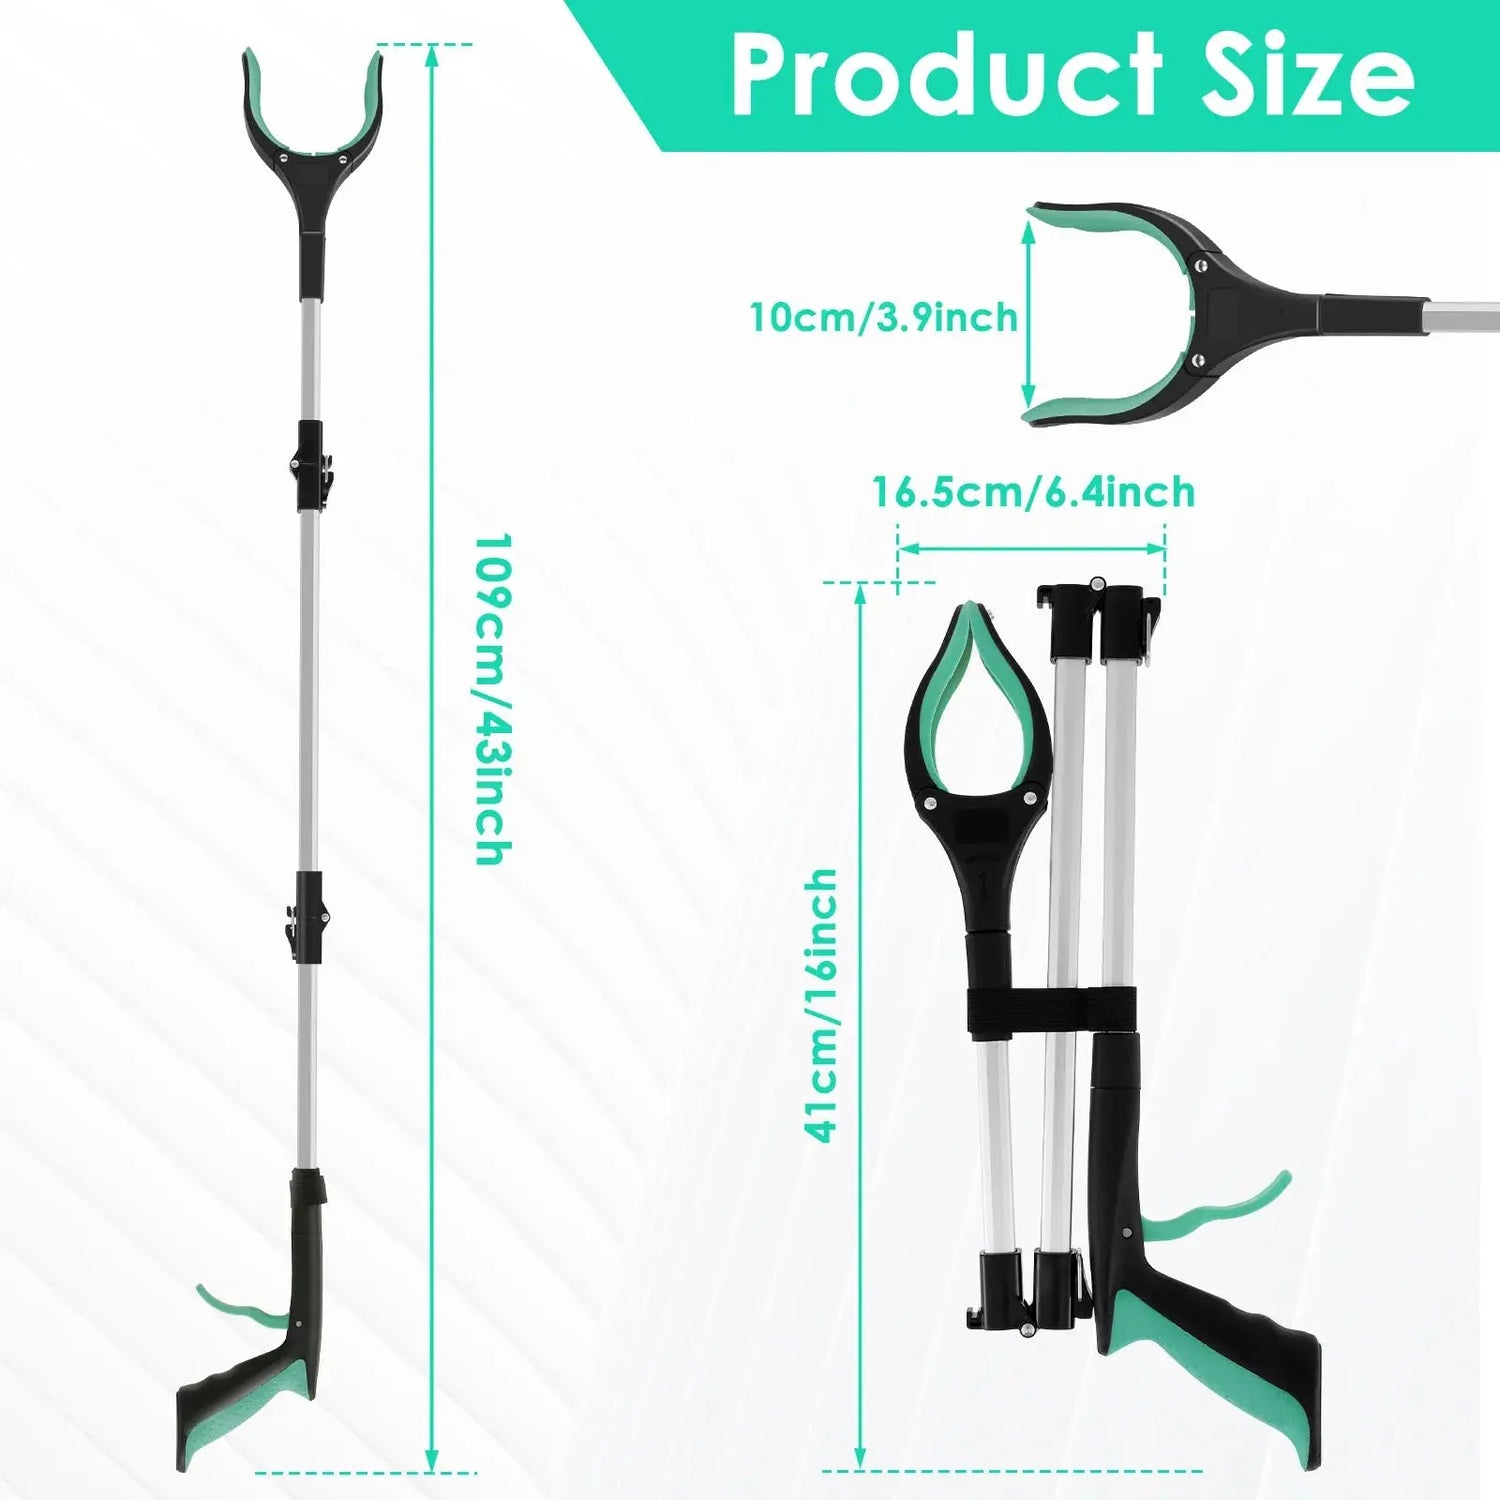 A graphic of a silver and black Soulful Trading Foldable Grabber with 360° Swivel Clip tool with an ergonomic handle, showing dimensions, with side and expanded views labeled with measurements in centimeters and inches.